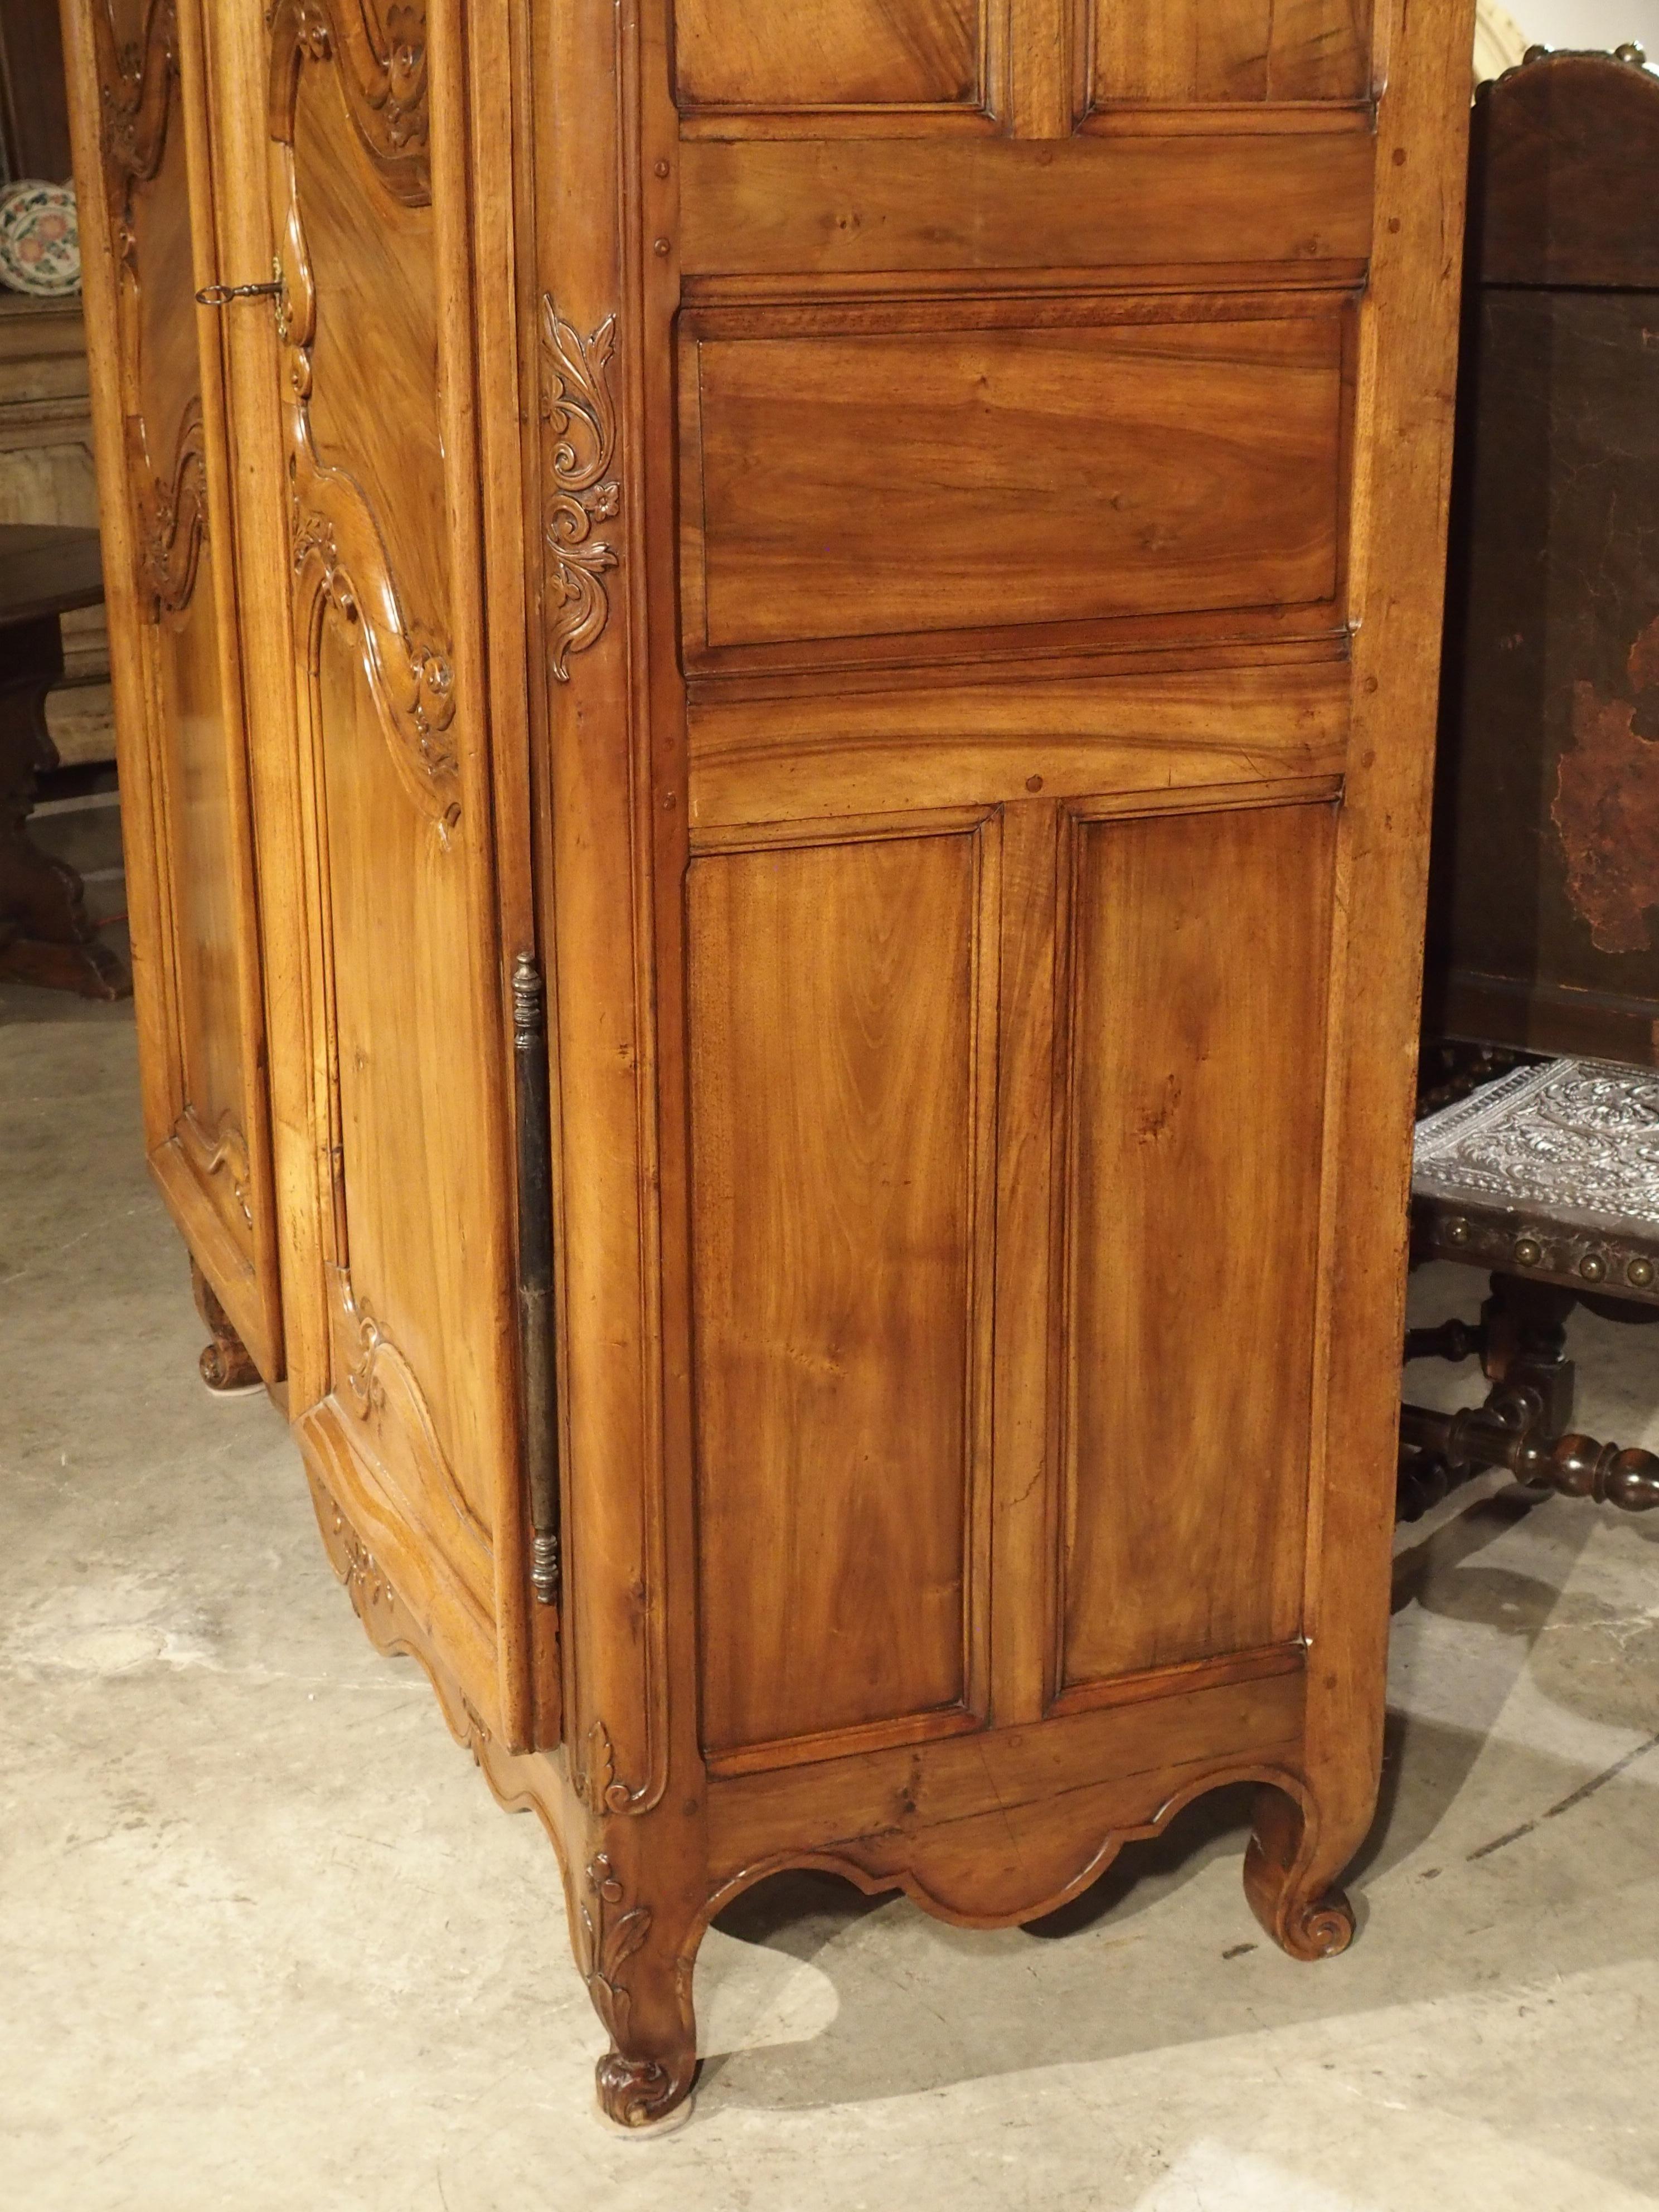 This magnificent blonde walnut wood armoire from the Vallee du Rhone is from the mid 1700’s during the Louis XV period. During the reign of Louis XV, asymmetry in furniture lines was all pervasive, with curved lines softening forms and motifs.